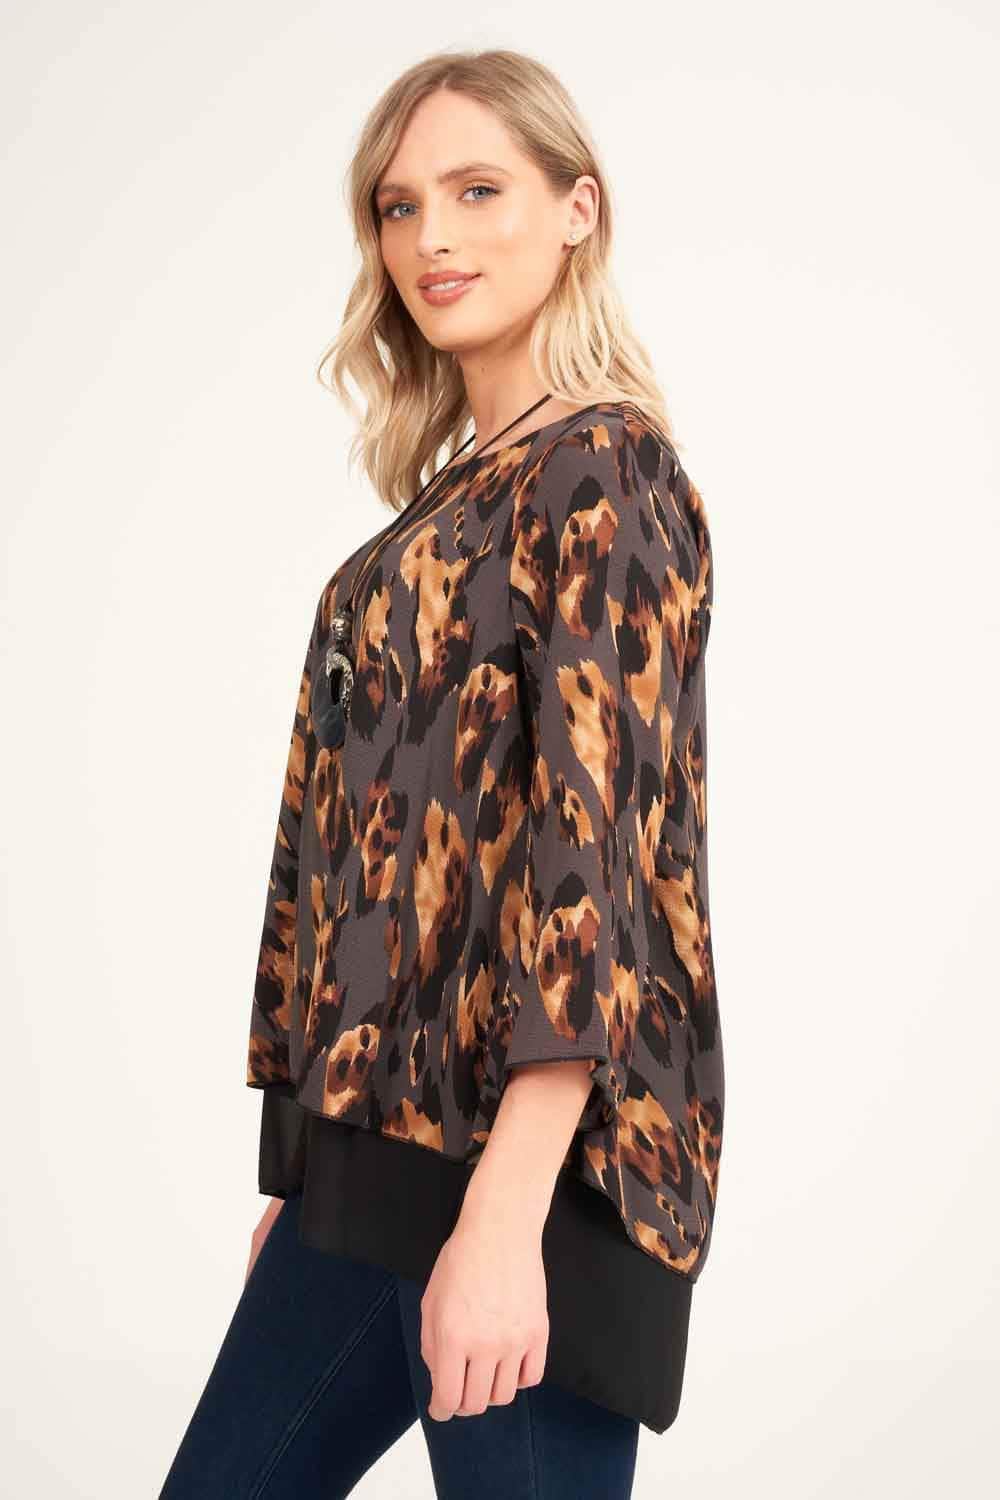 Saloos Animal Printed Layered Top With Necklace